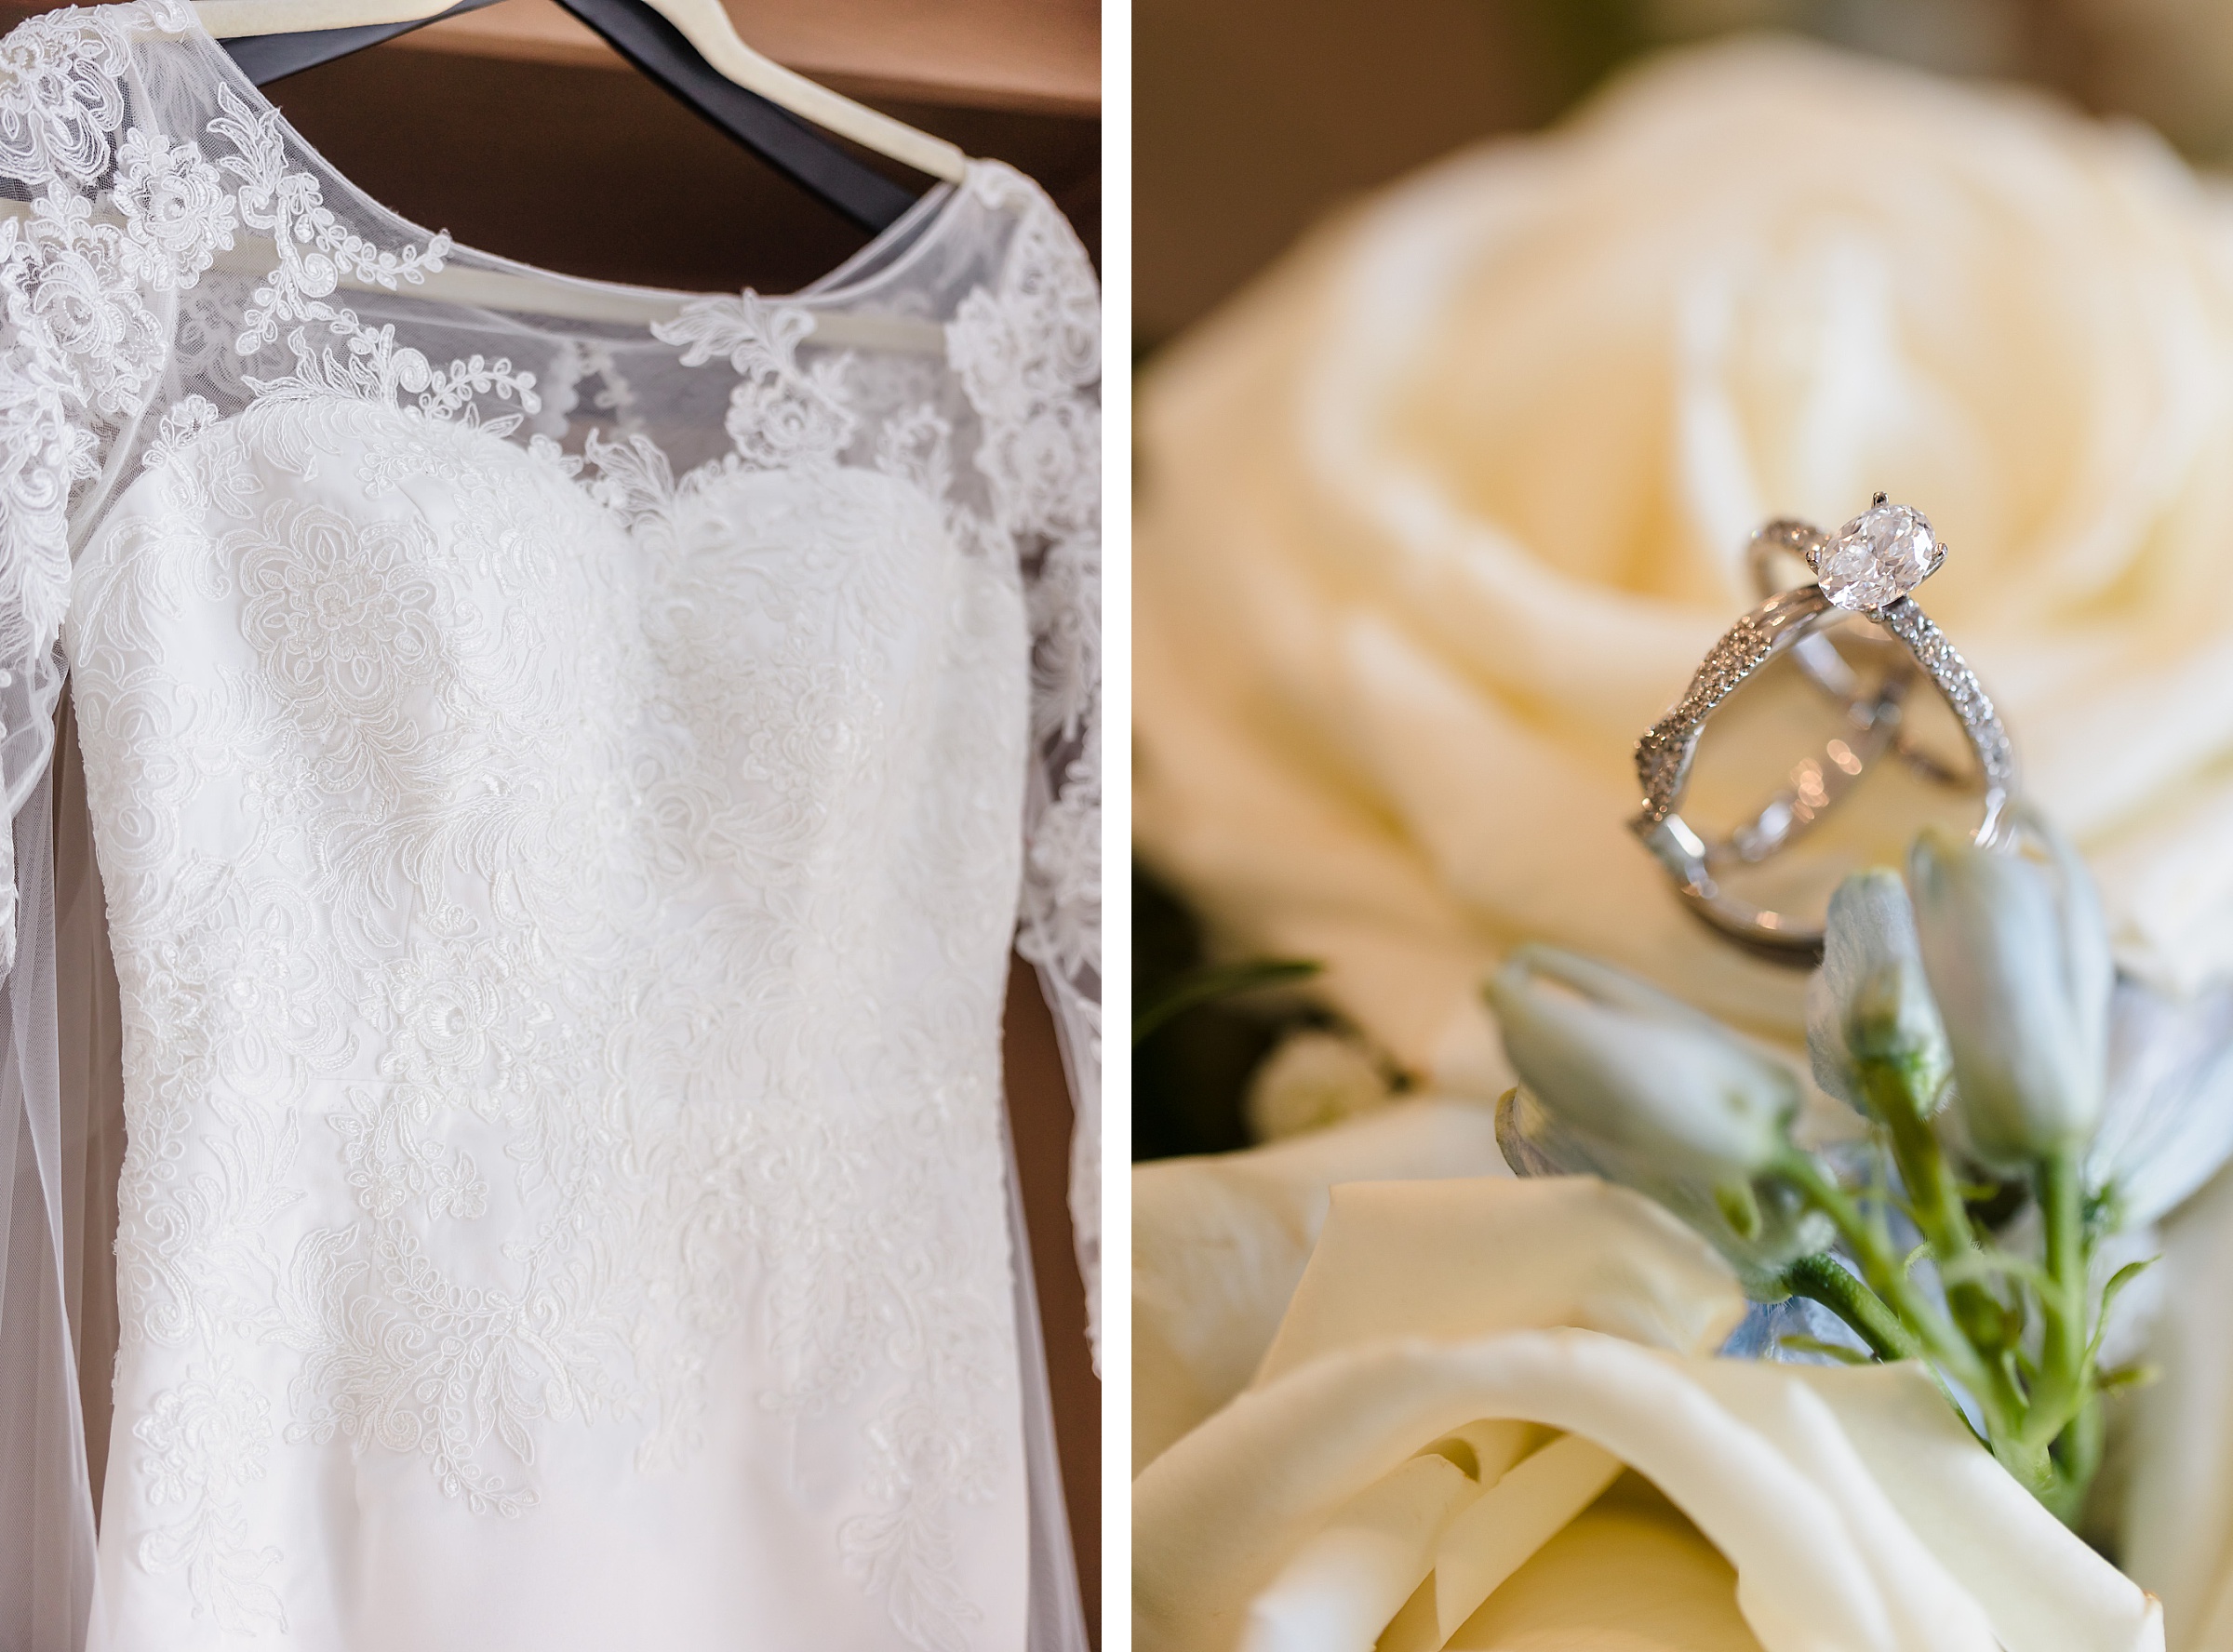 Bridal details during a wedding at the Ritz Charles in Carmel, Indiana